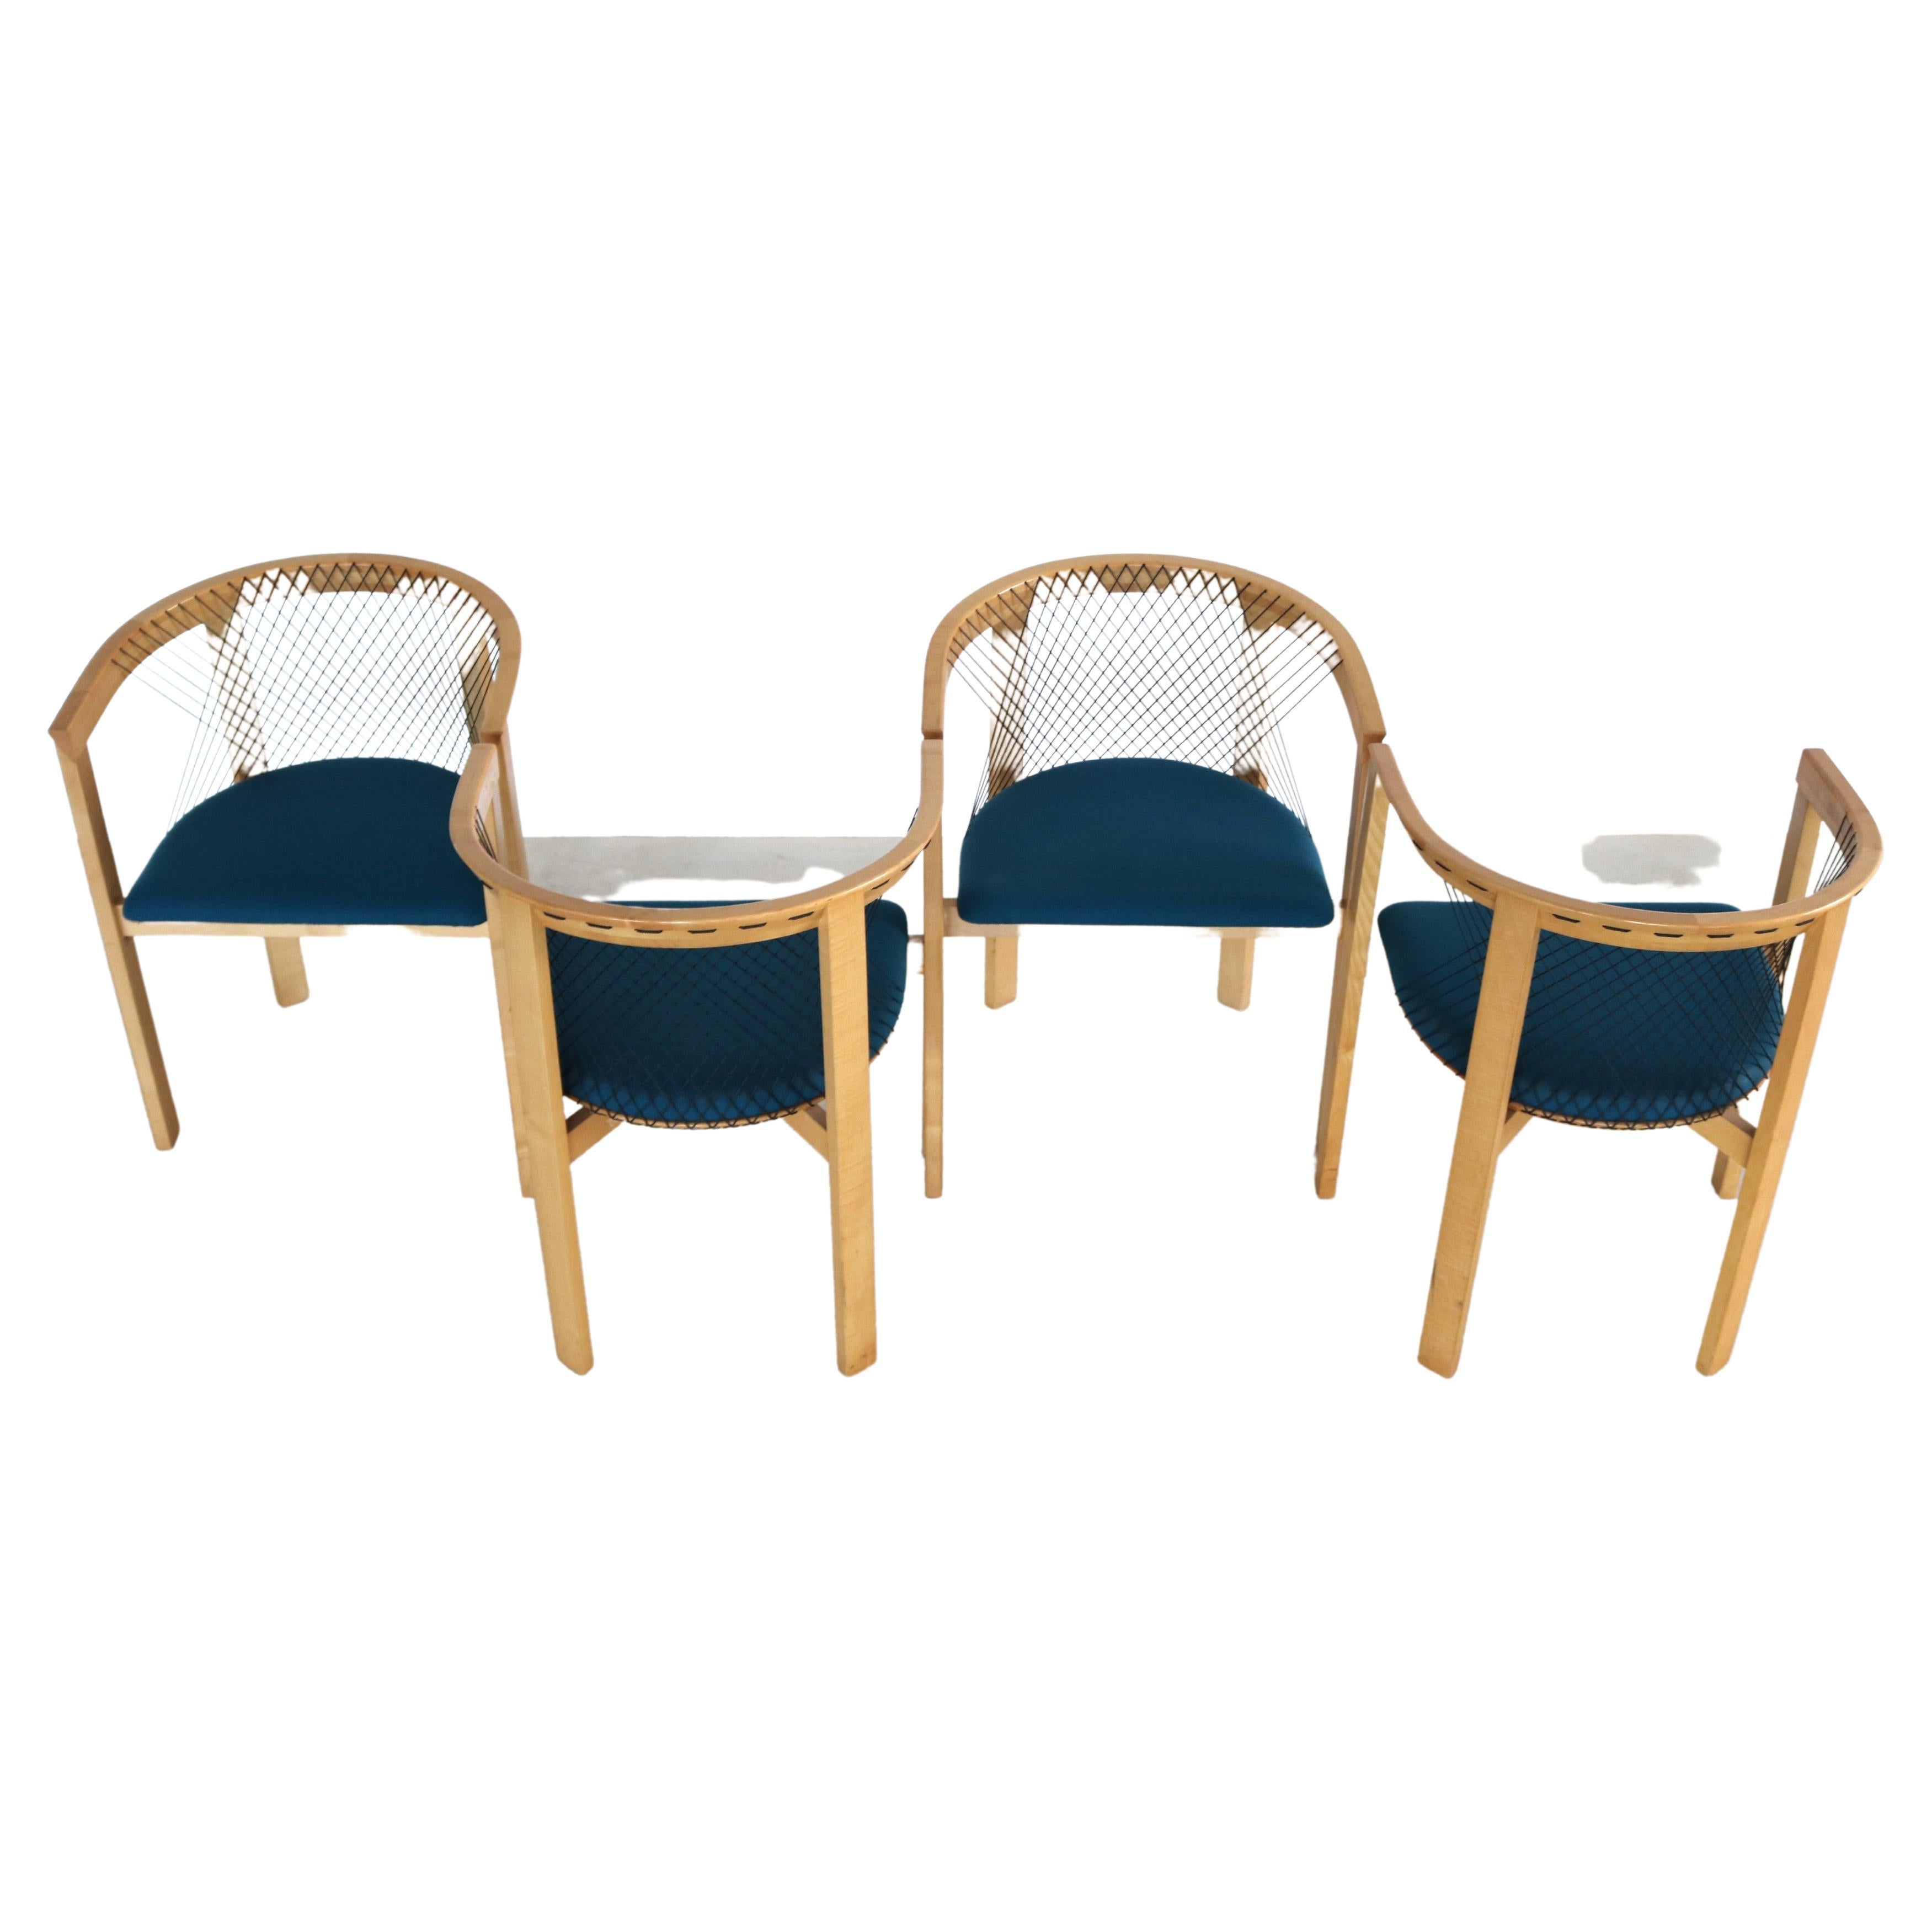 Set of 4 "String" Dining Chairs by Tranekaer For Sale